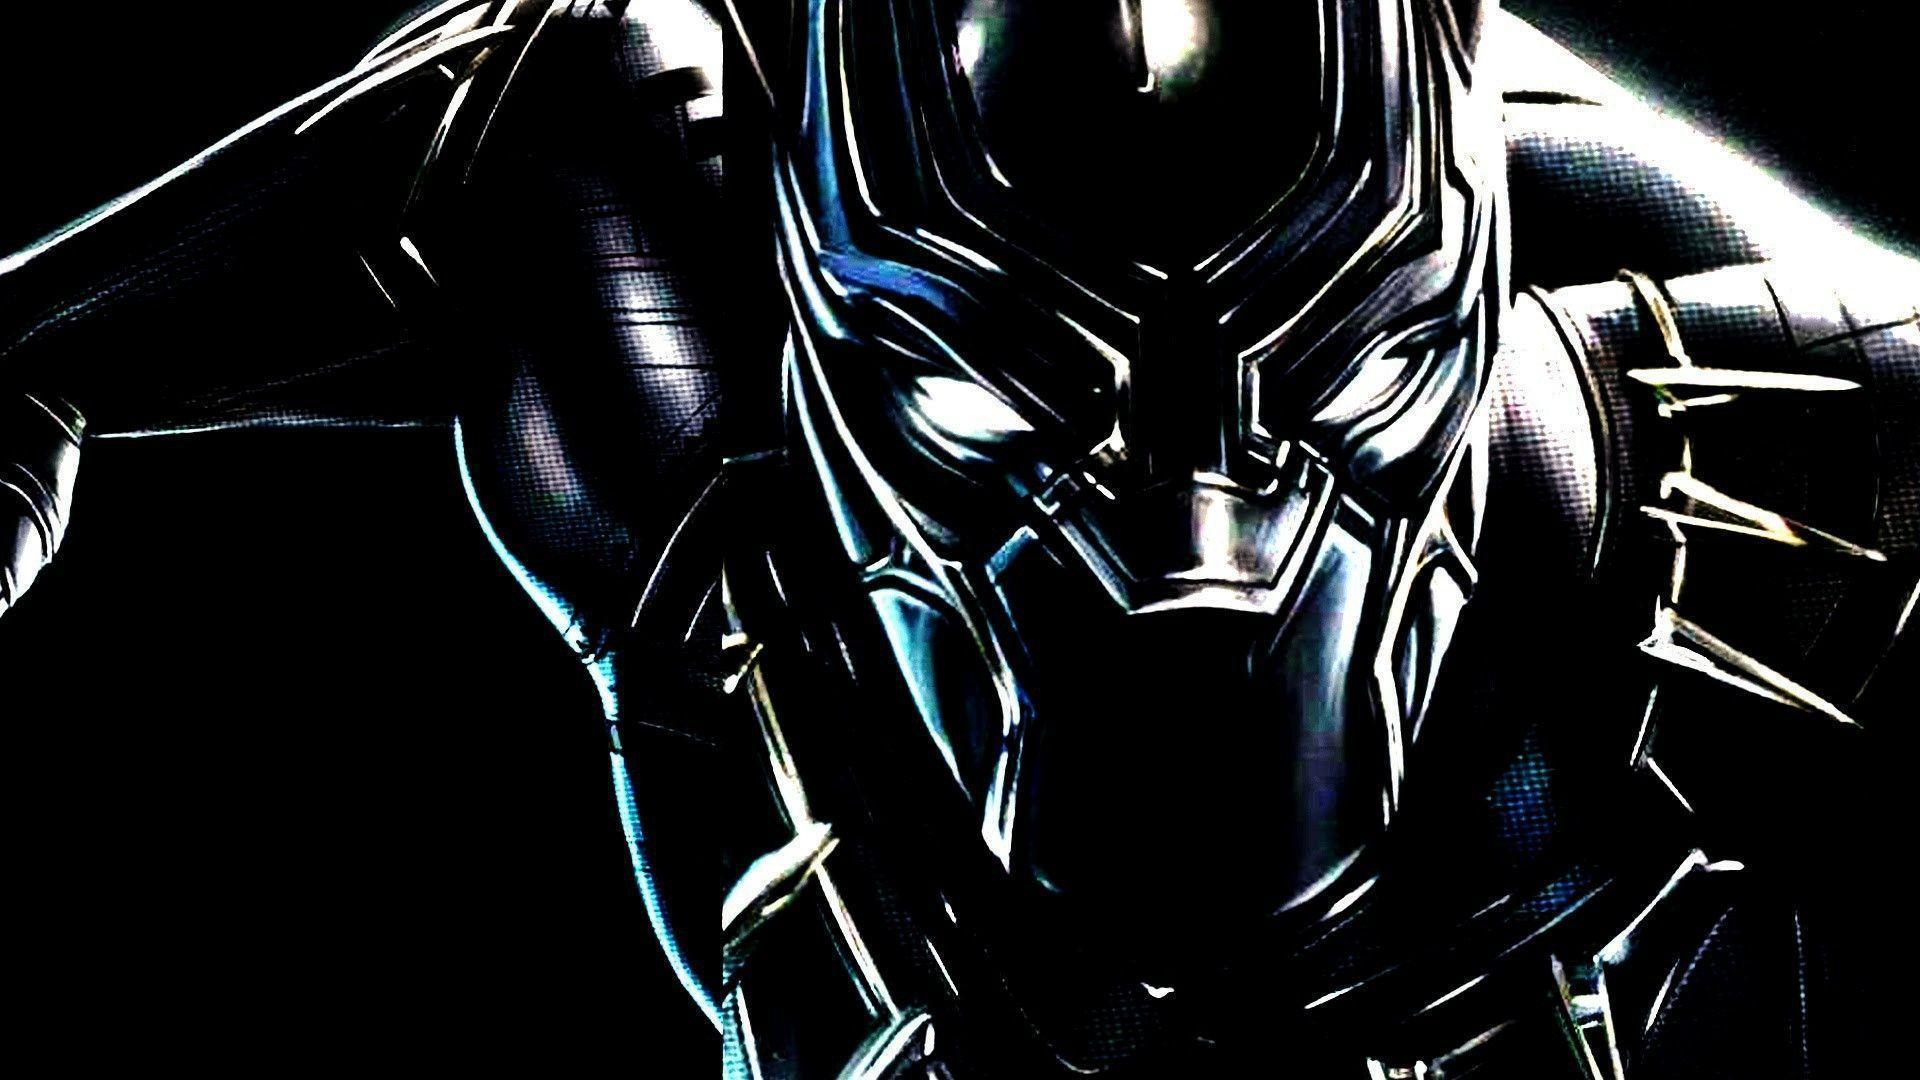 1920 x 1080 · jpeg - Black Panther Marvel Wallpapers - Wallpaper Cave